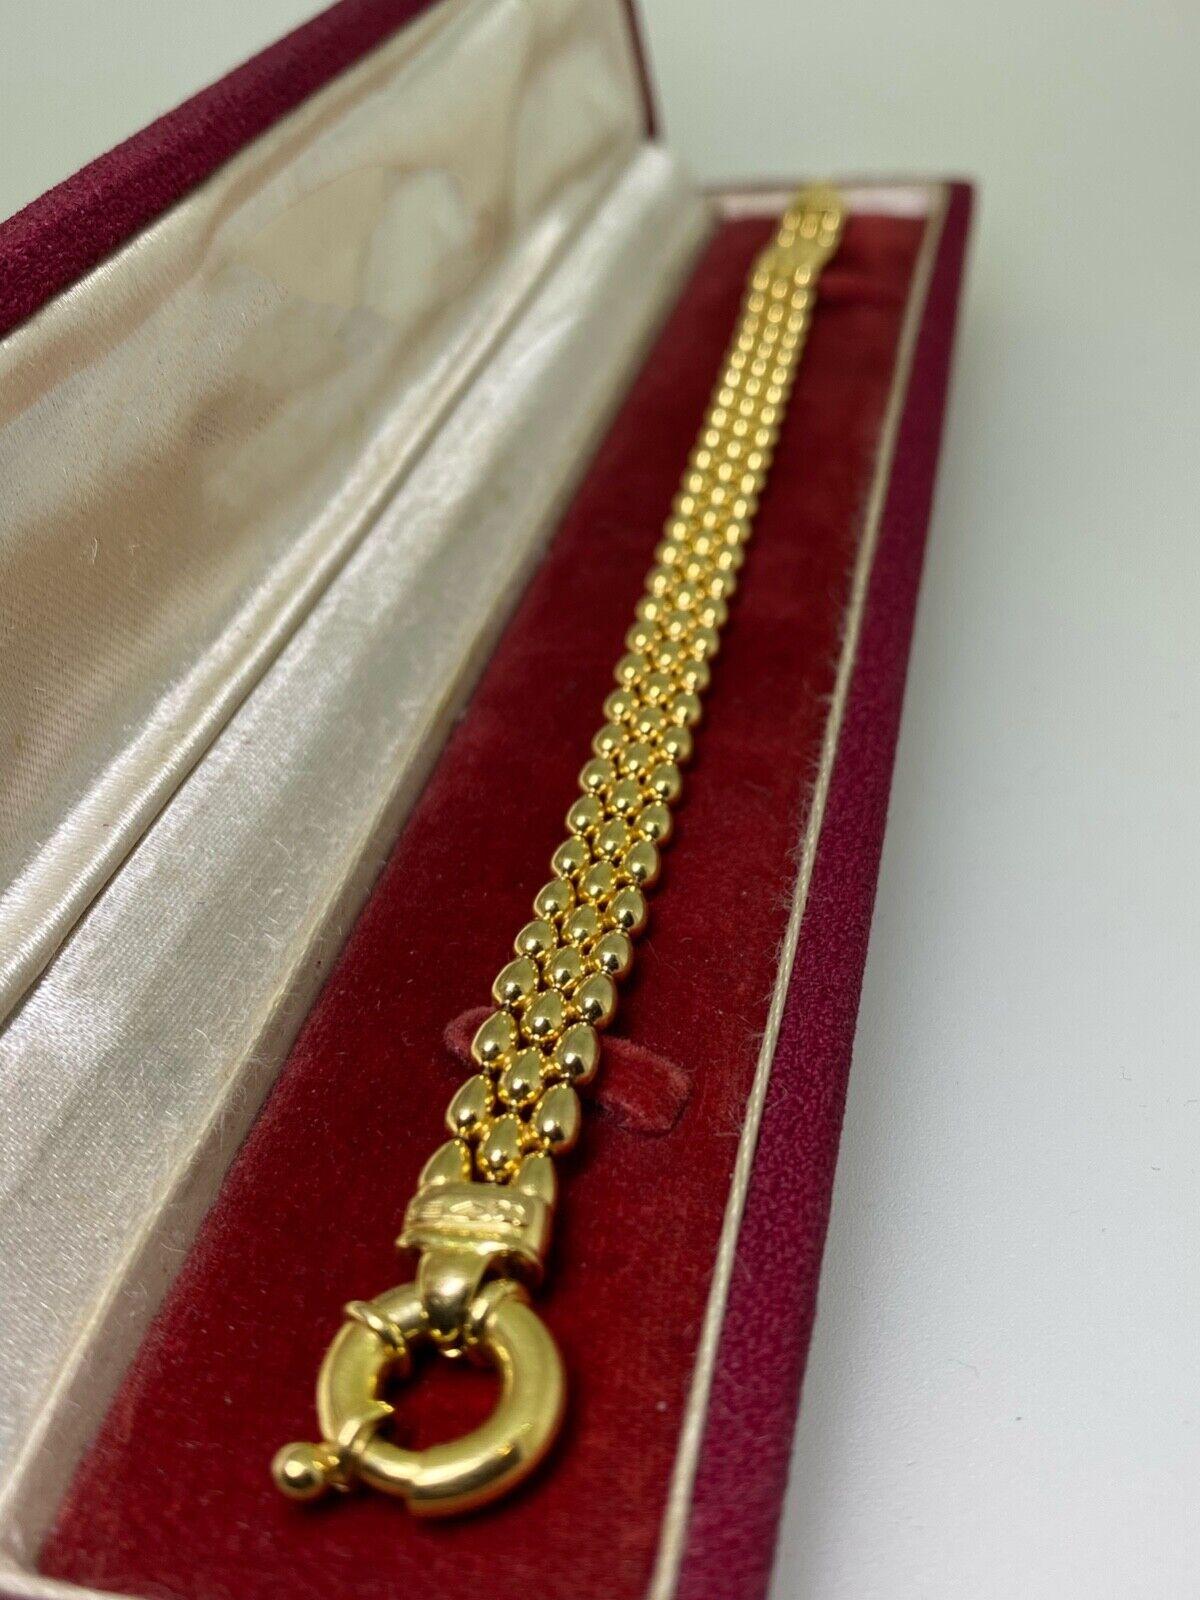 Modern Superb 9Kt Yellow Gold Italian Panther Link Bracelet, c2000s. Mint Condition. For Sale